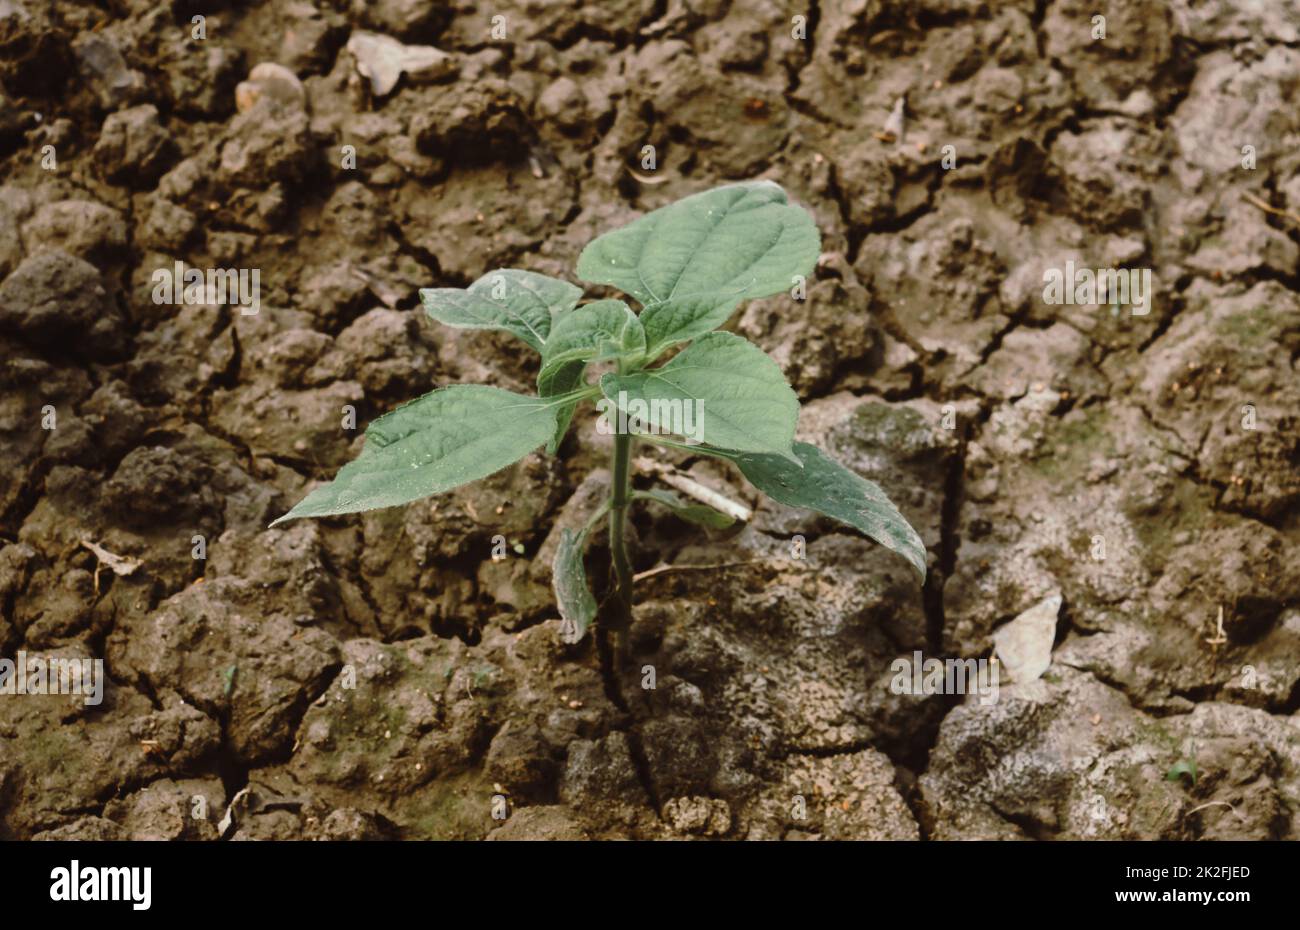 Agriculture. A Growing plant. New Plant growing in sunlight. Sprouting and seedling. Young new baby plants growing in germination sequence on fertile soil background. Stock Photo